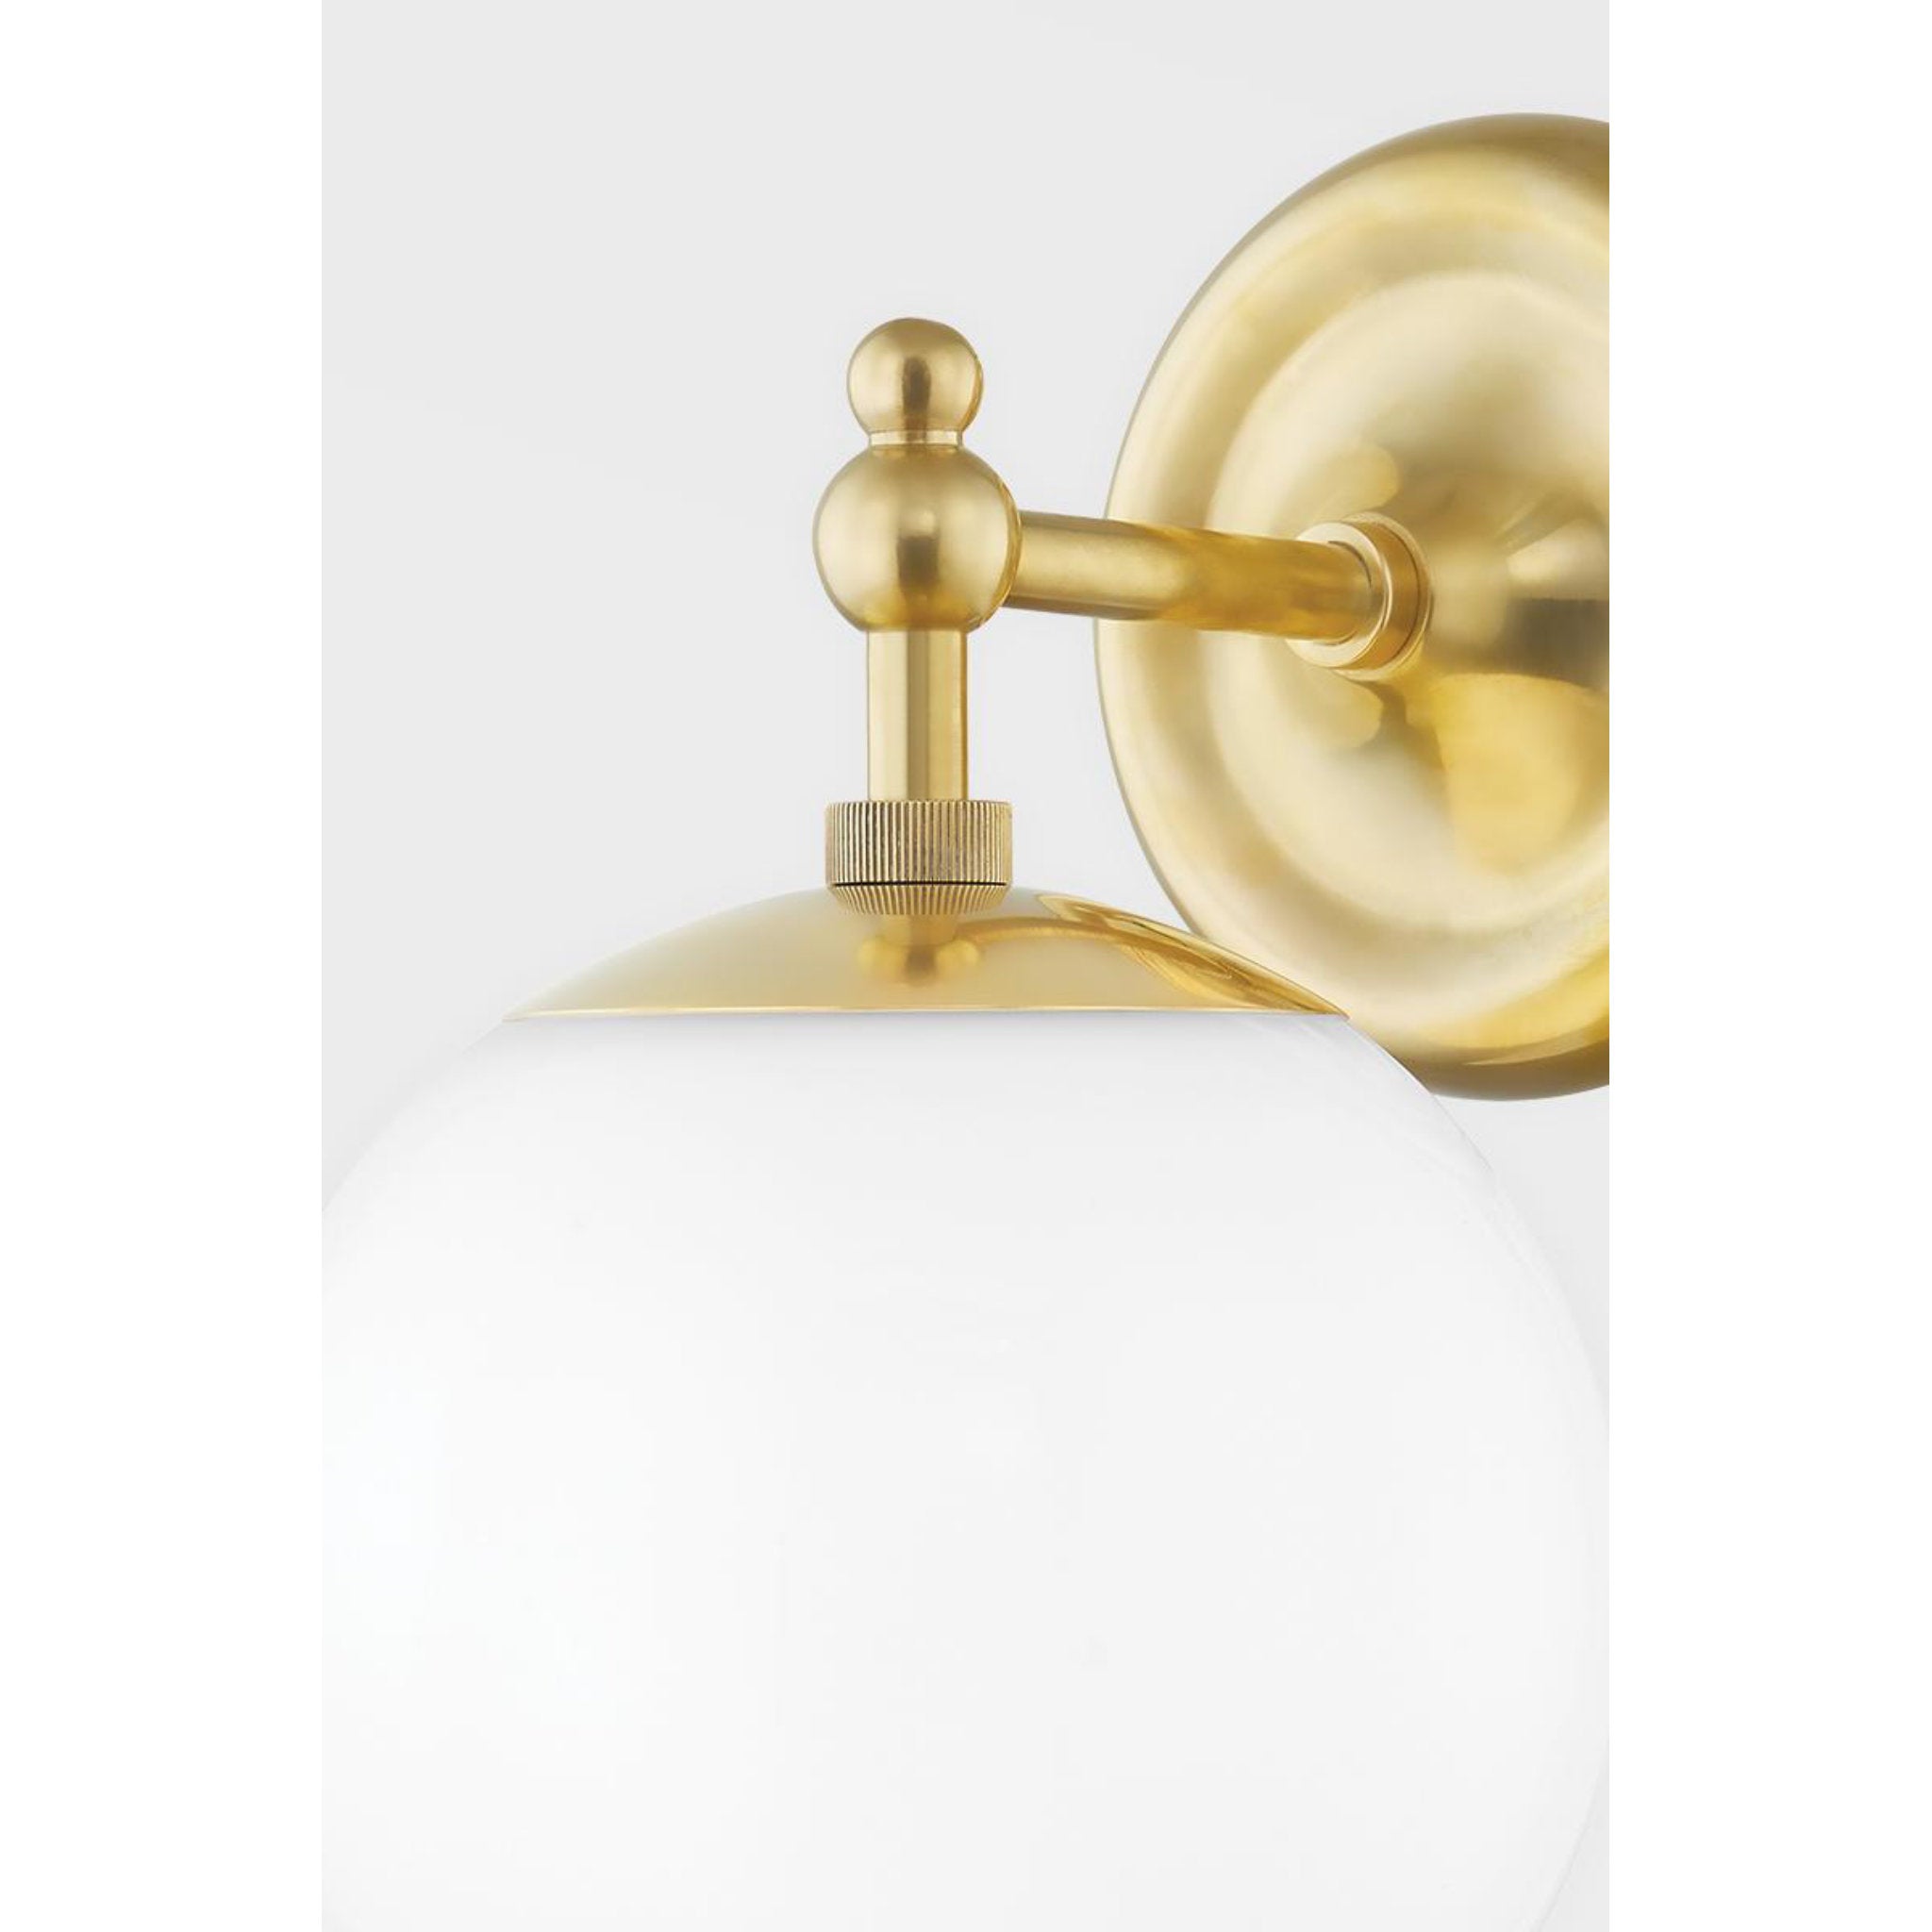 Sphere No.1 1 Light Pendant in Aged Brass by Mark D. Sikes